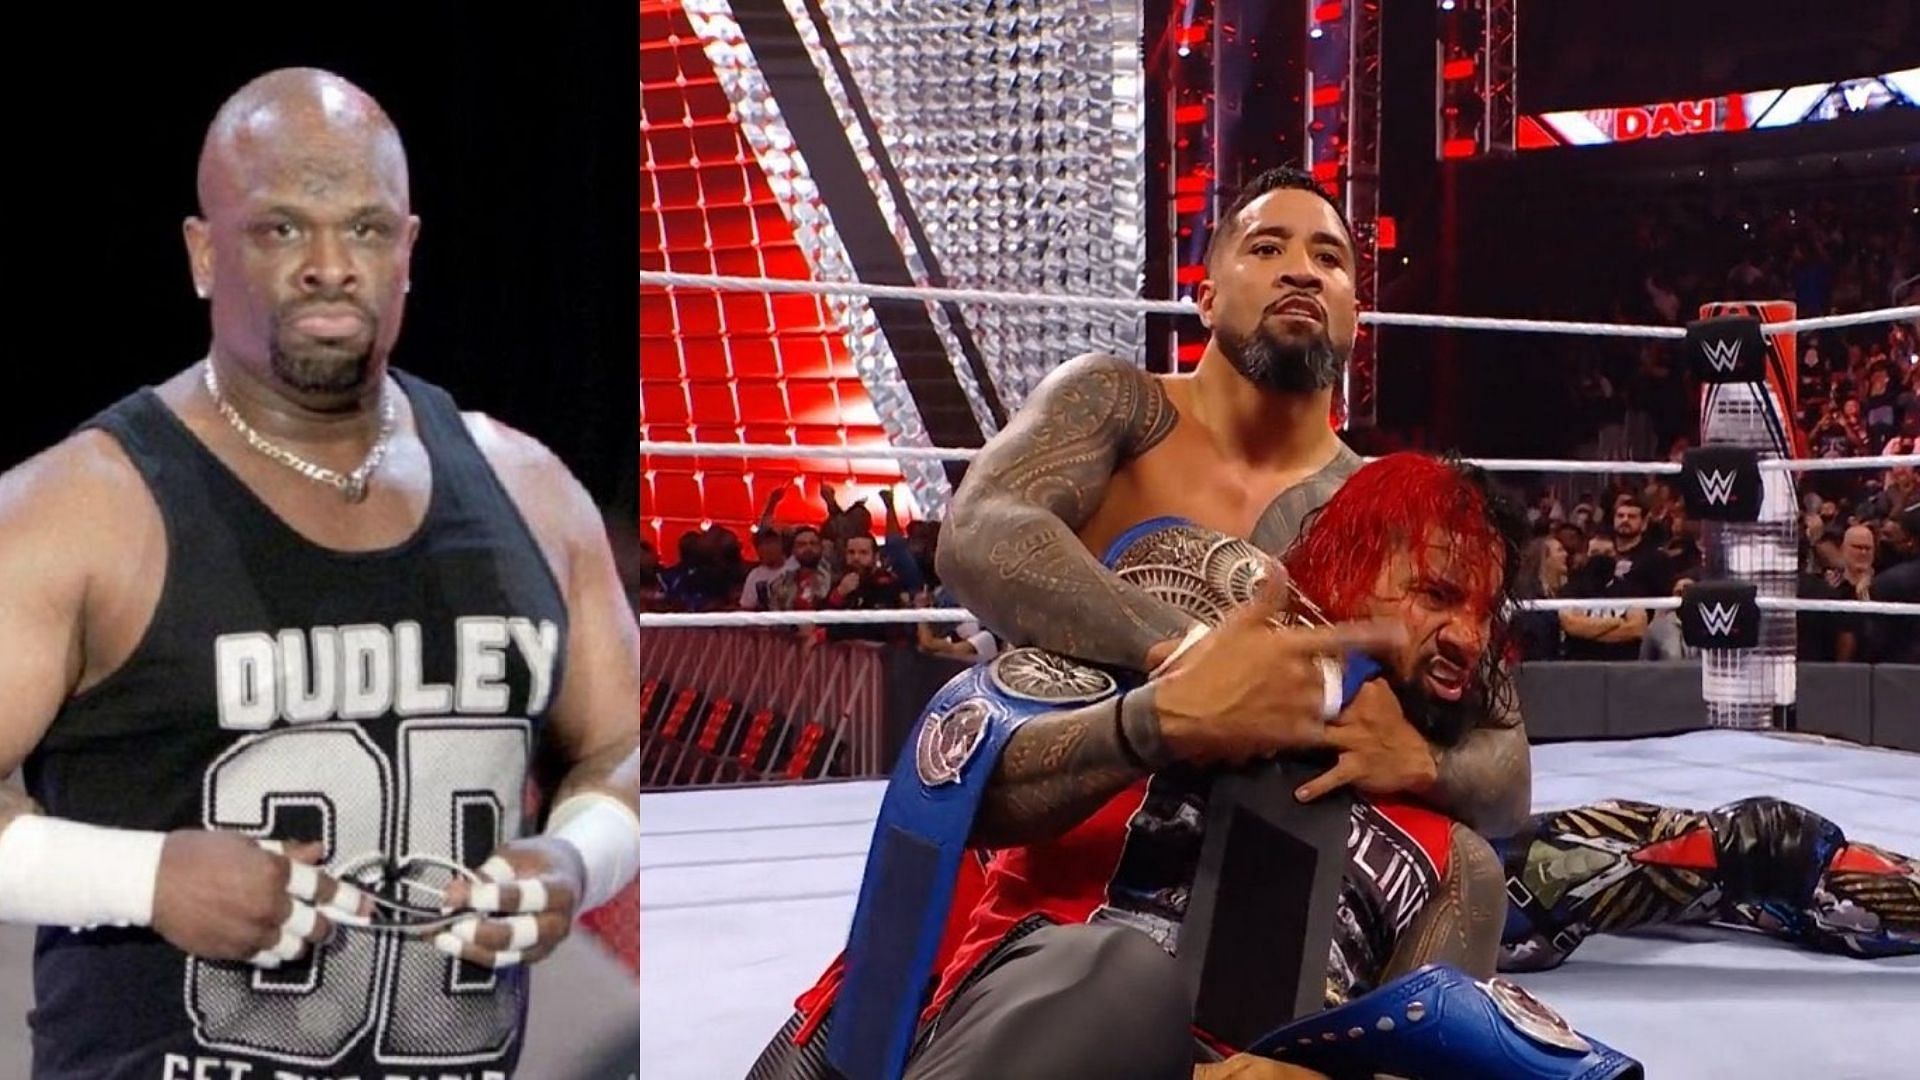 WWE News: D-Von Dudley responds to the finish of The New Day vs. The Usos match at Day 1